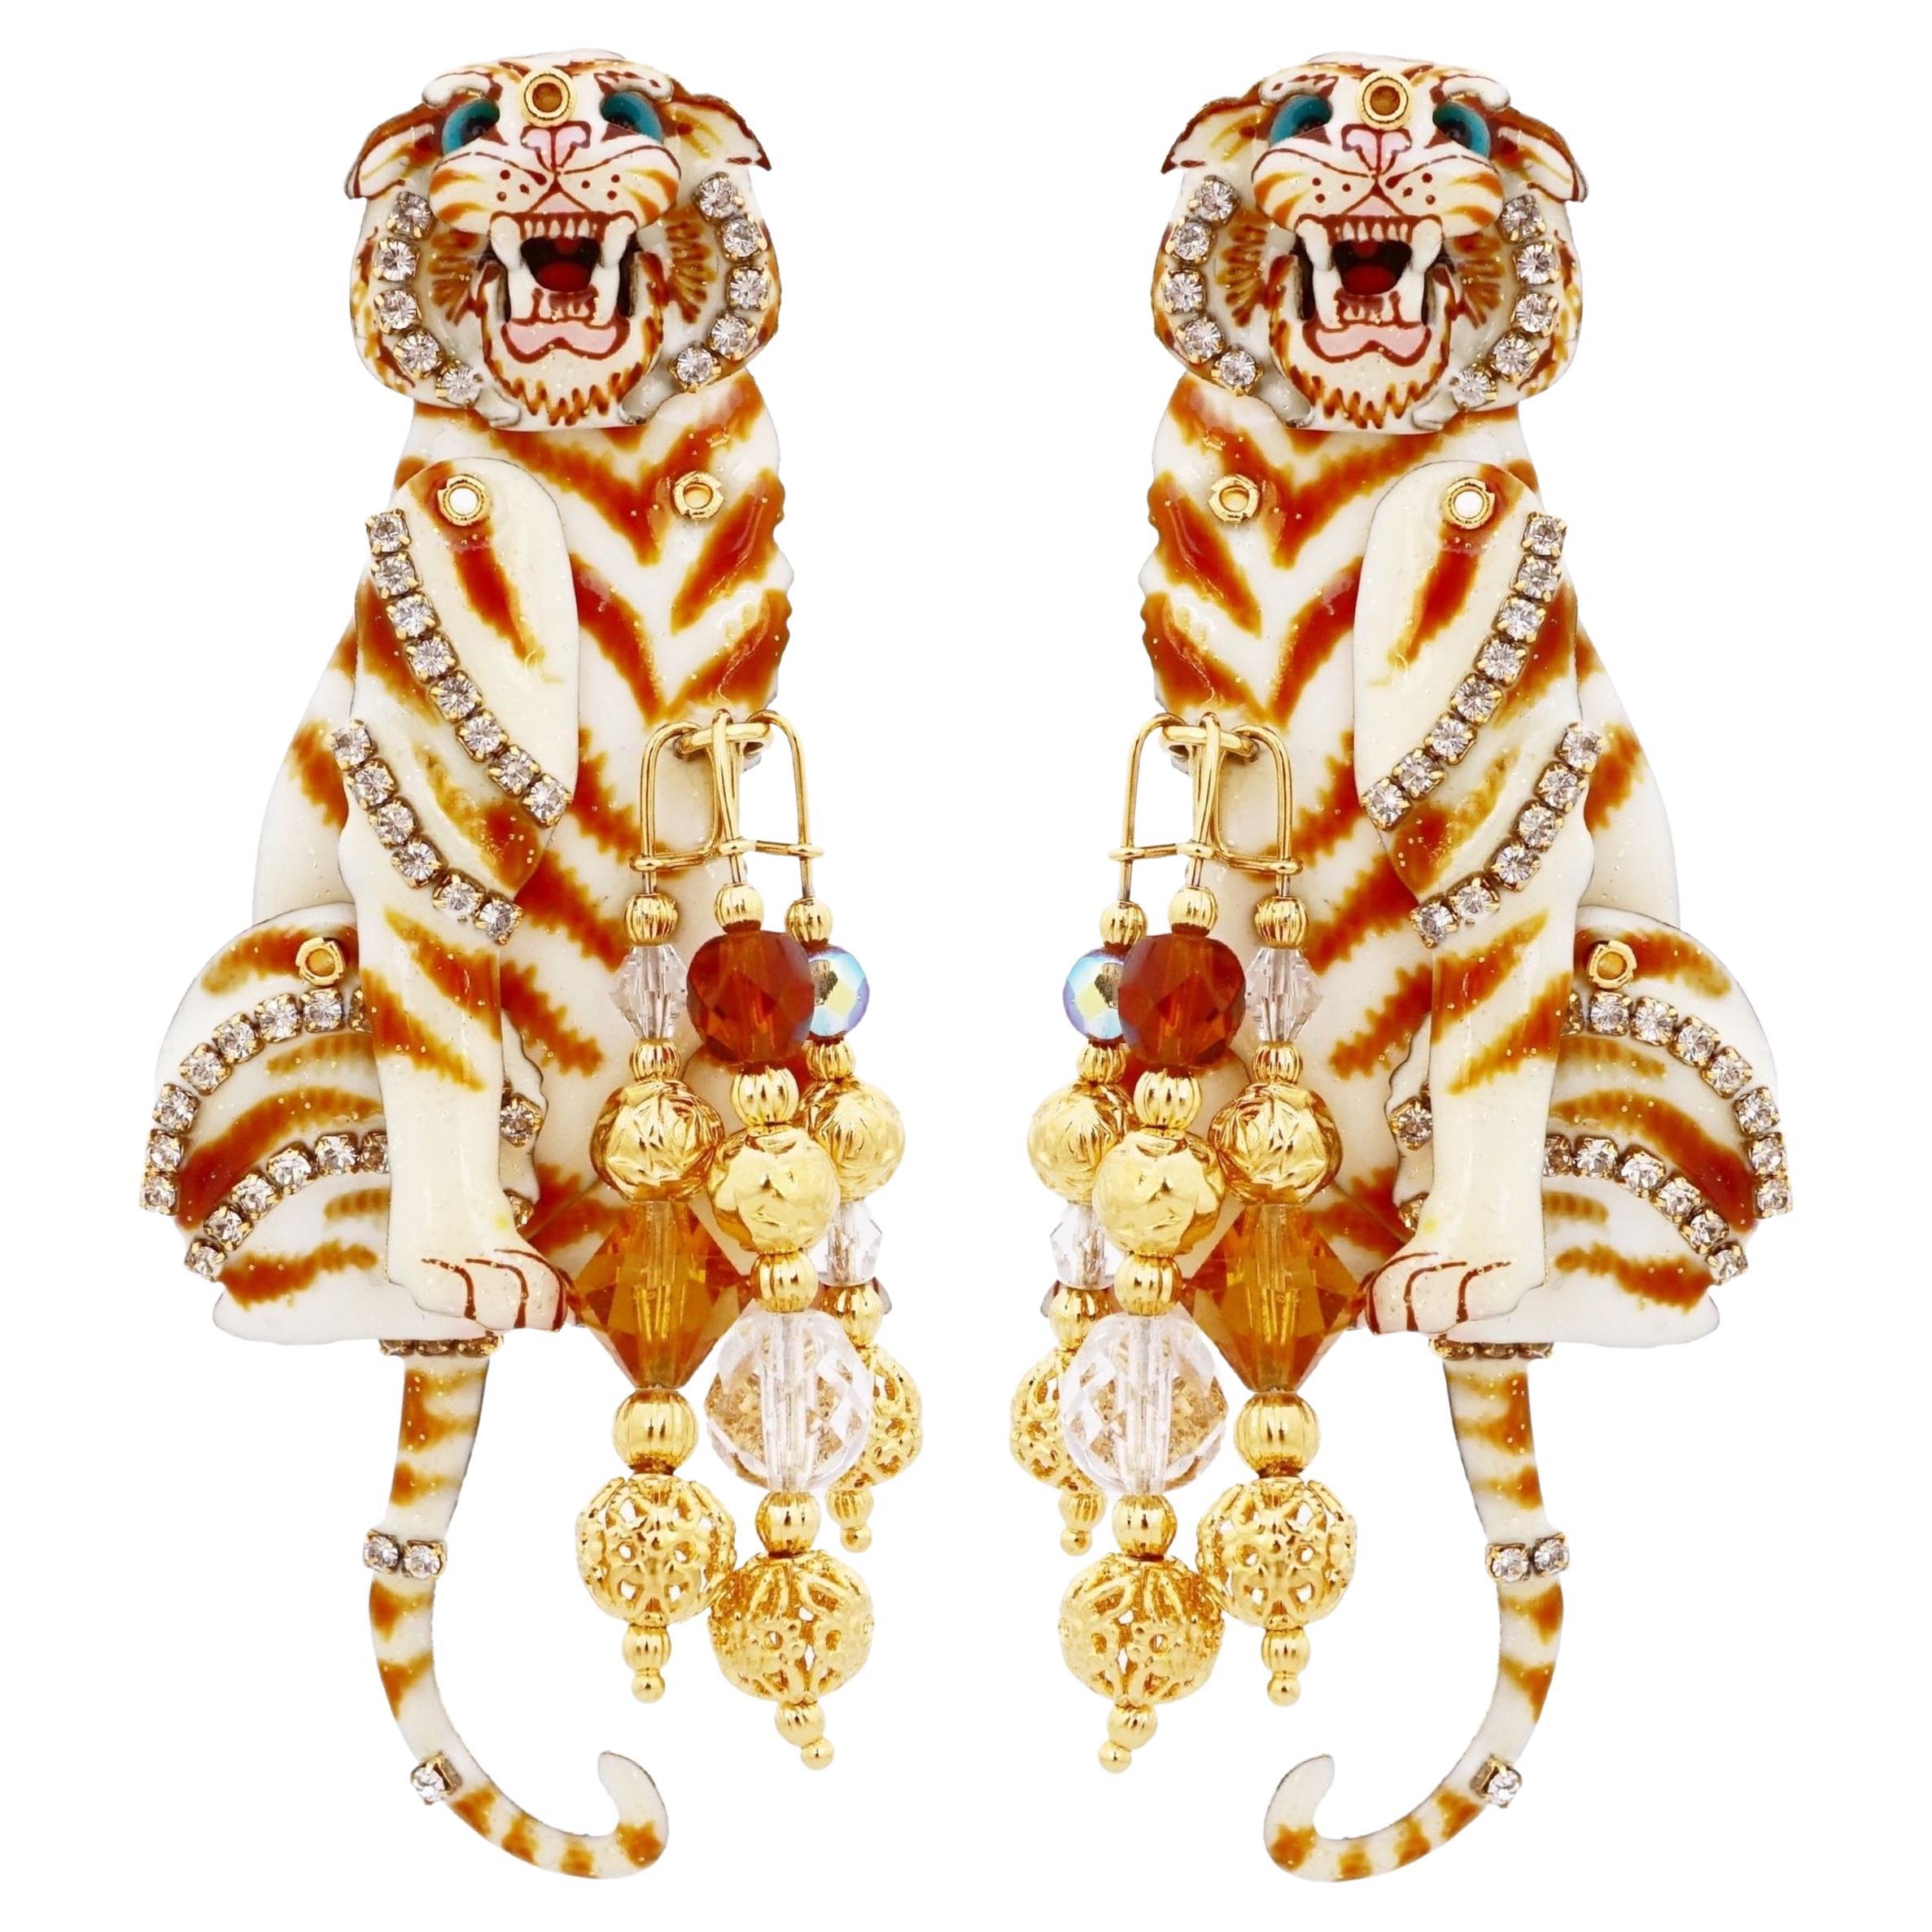 Enamel Marionette "White Tie Tiger" Statement Earrings By Lunch At The Ritz